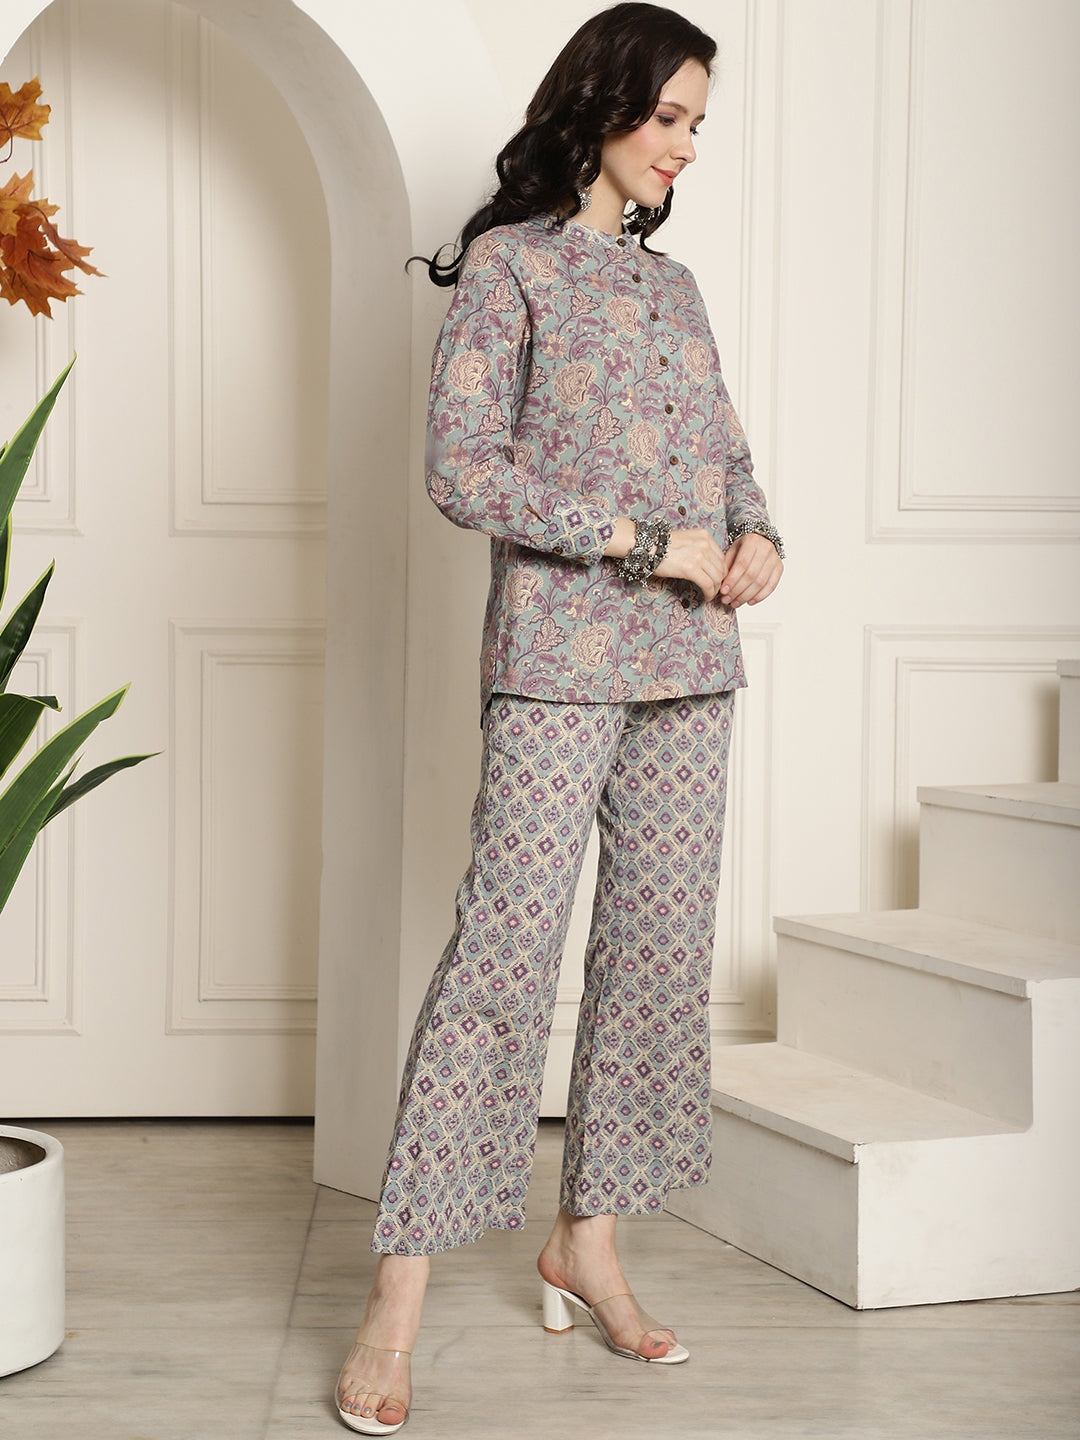 Mauve Color Abstract Printed  Cotton Co-ord set Claura Designs Pvt. Ltd. Cord set Co-ord Set, Cotton, Ethnic, Floral, mauve color, Rayon